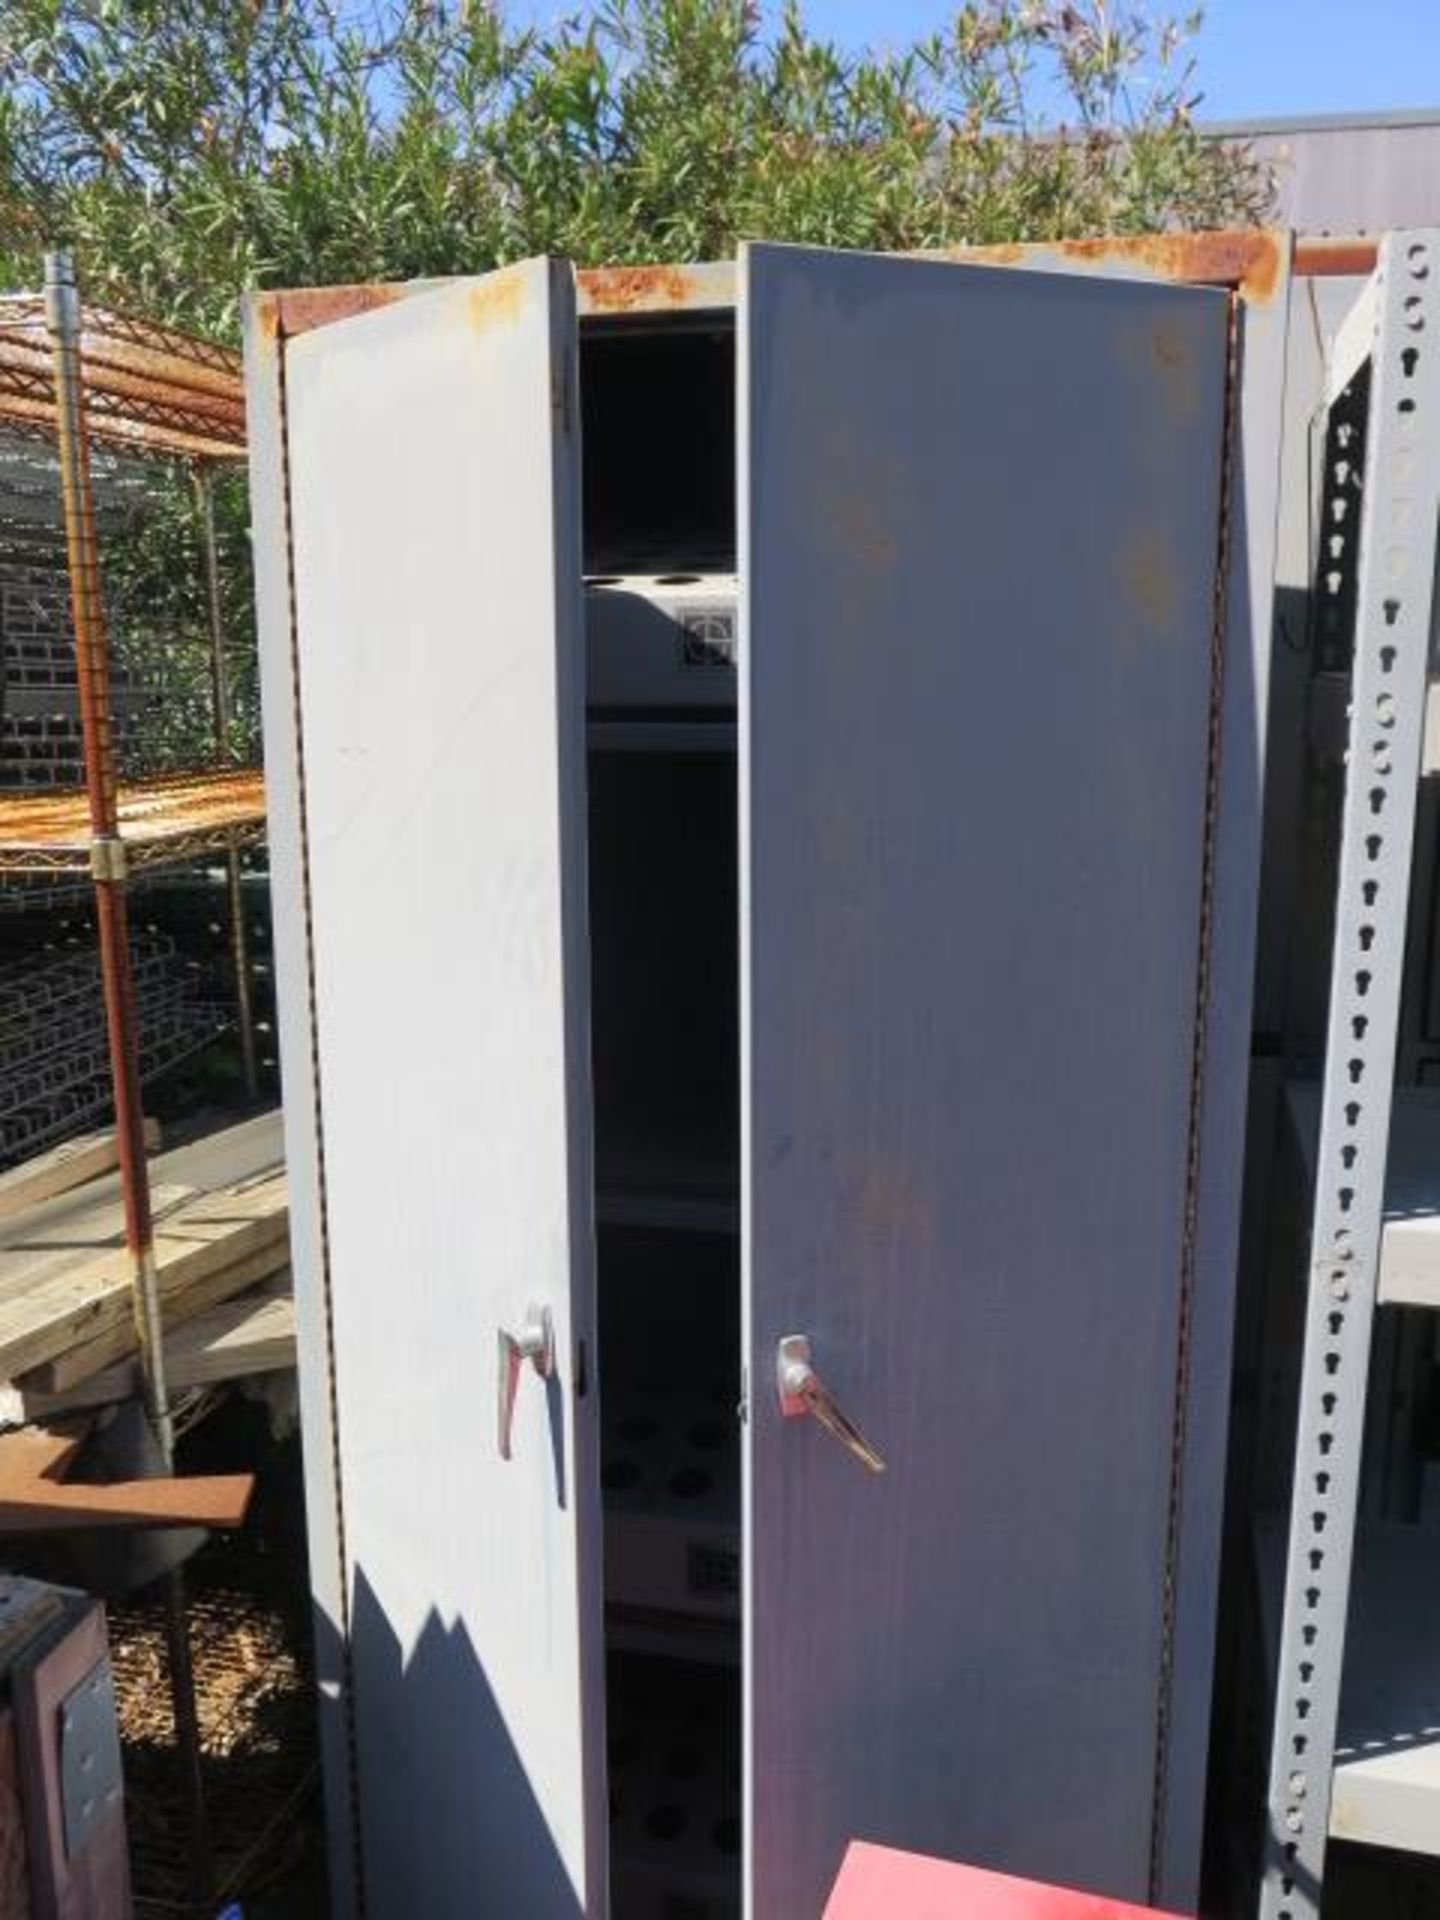 Employee Lockers, Storage Cabinet and Shelf (SOLD AS-IS - NO WARRANTY) (Located at 2091 Fortune Dr., - Image 3 of 7